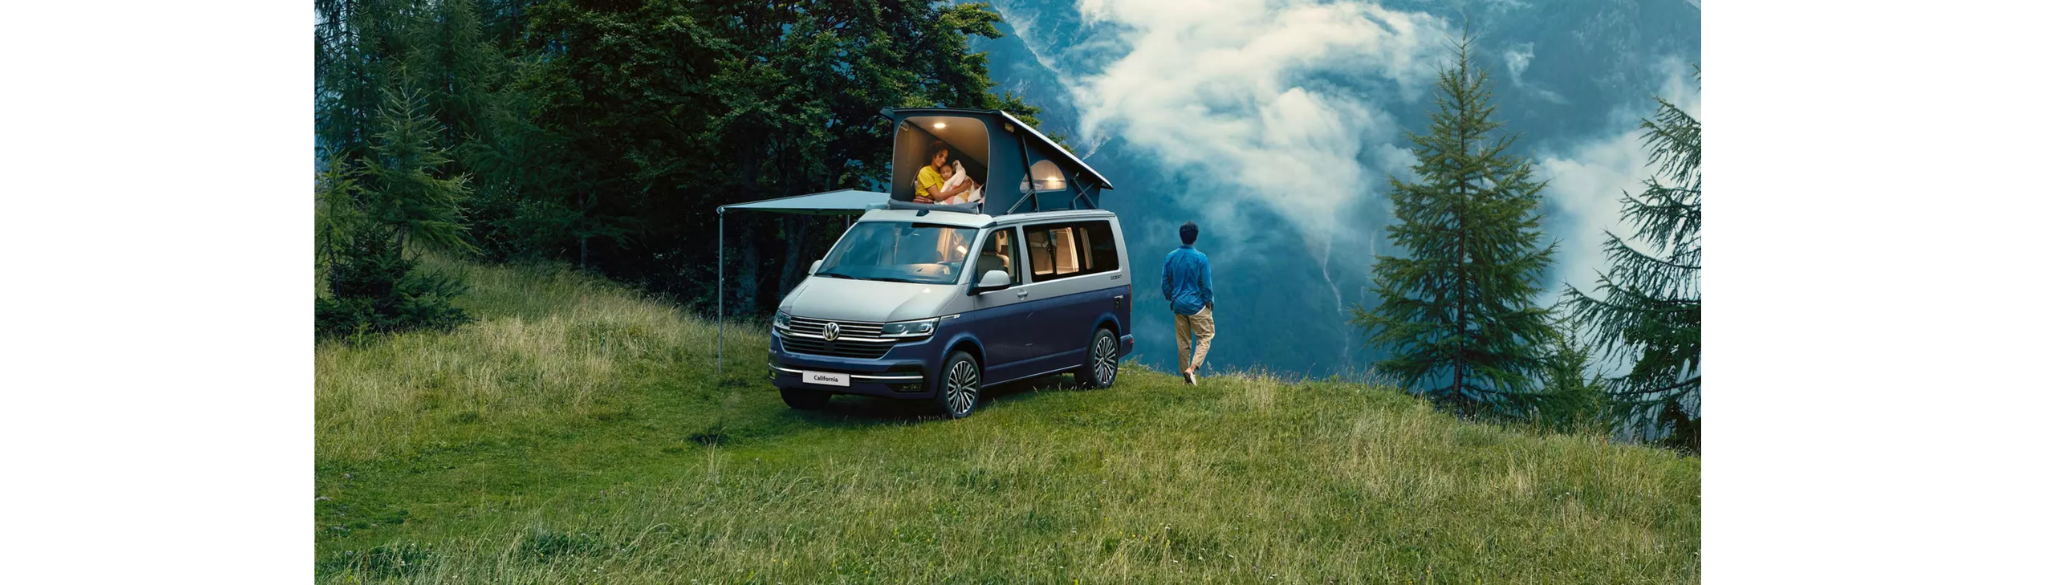 Volkswagen California parked on a hill